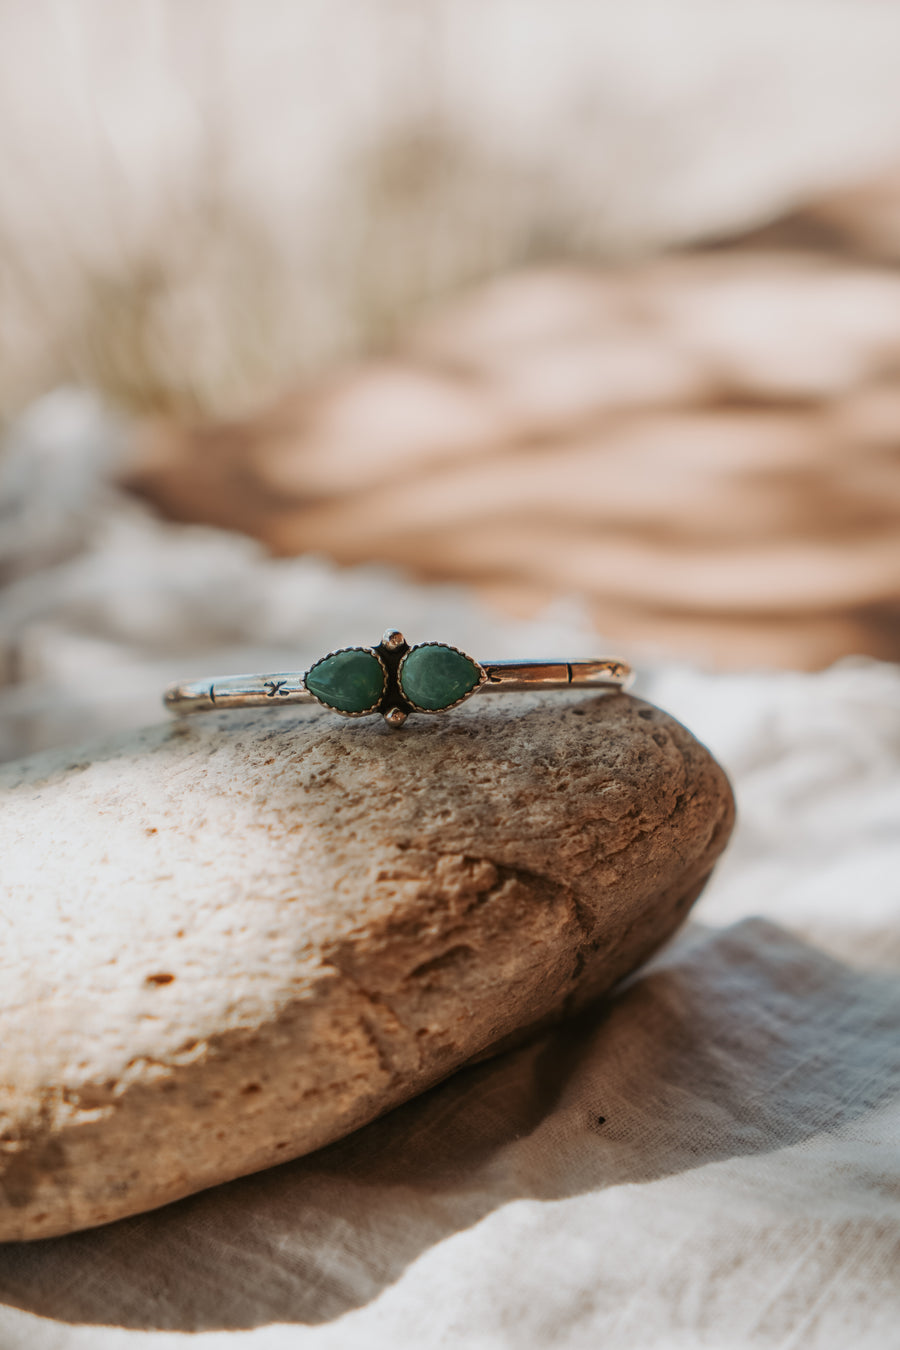 The Westbound Cuff in Kingman Turquoise